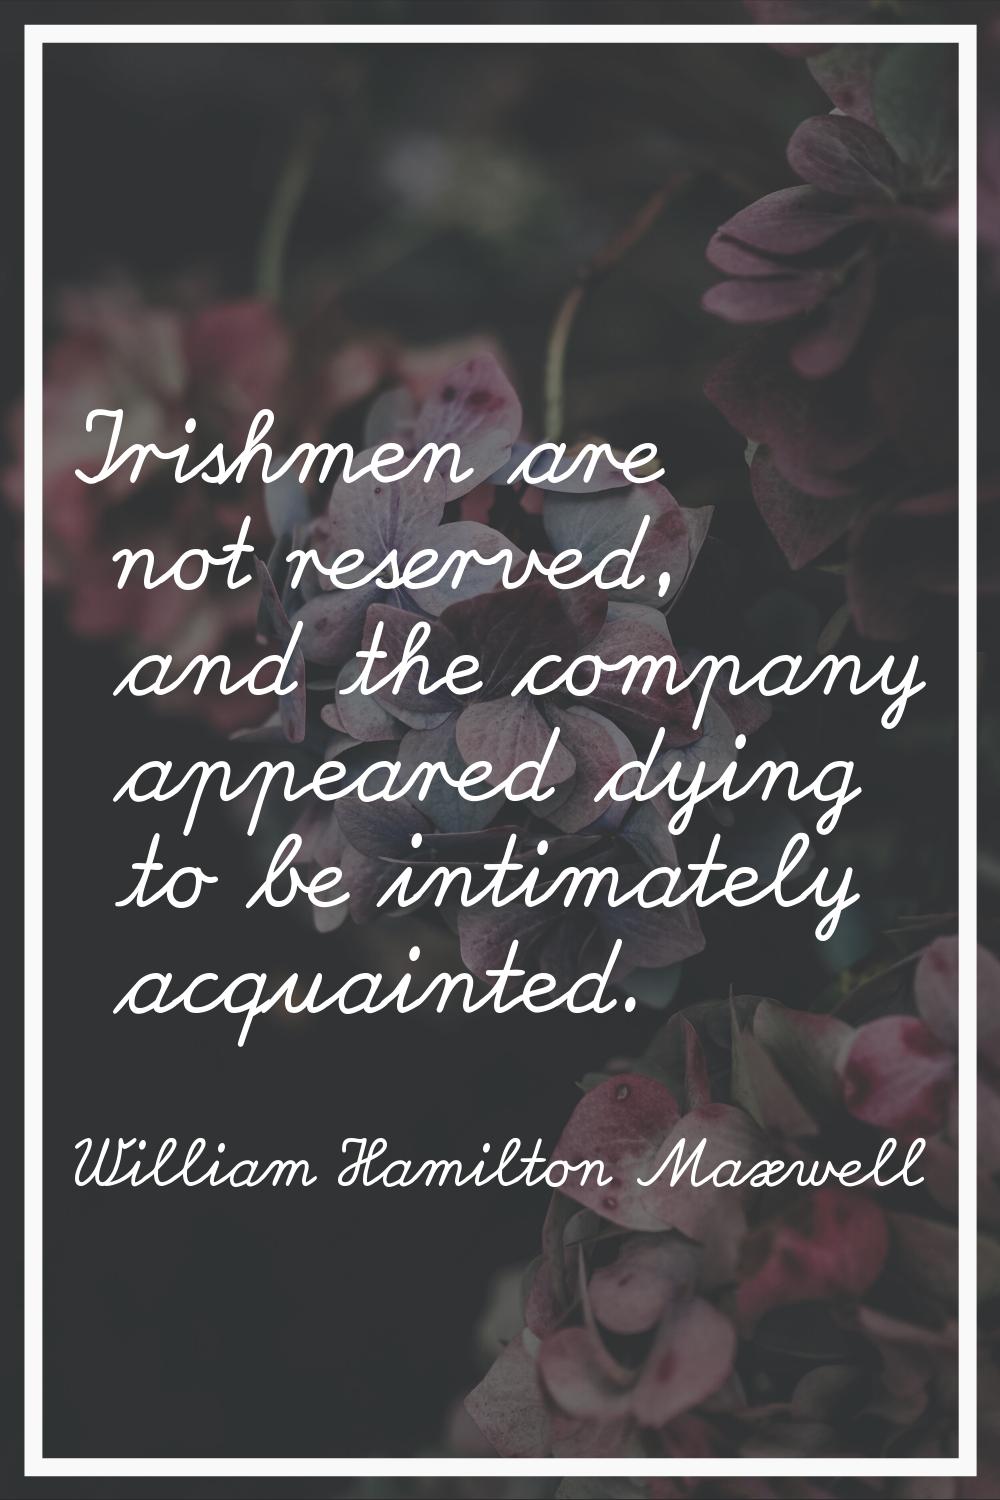 Irishmen are not reserved, and the company appeared dying to be intimately acquainted.